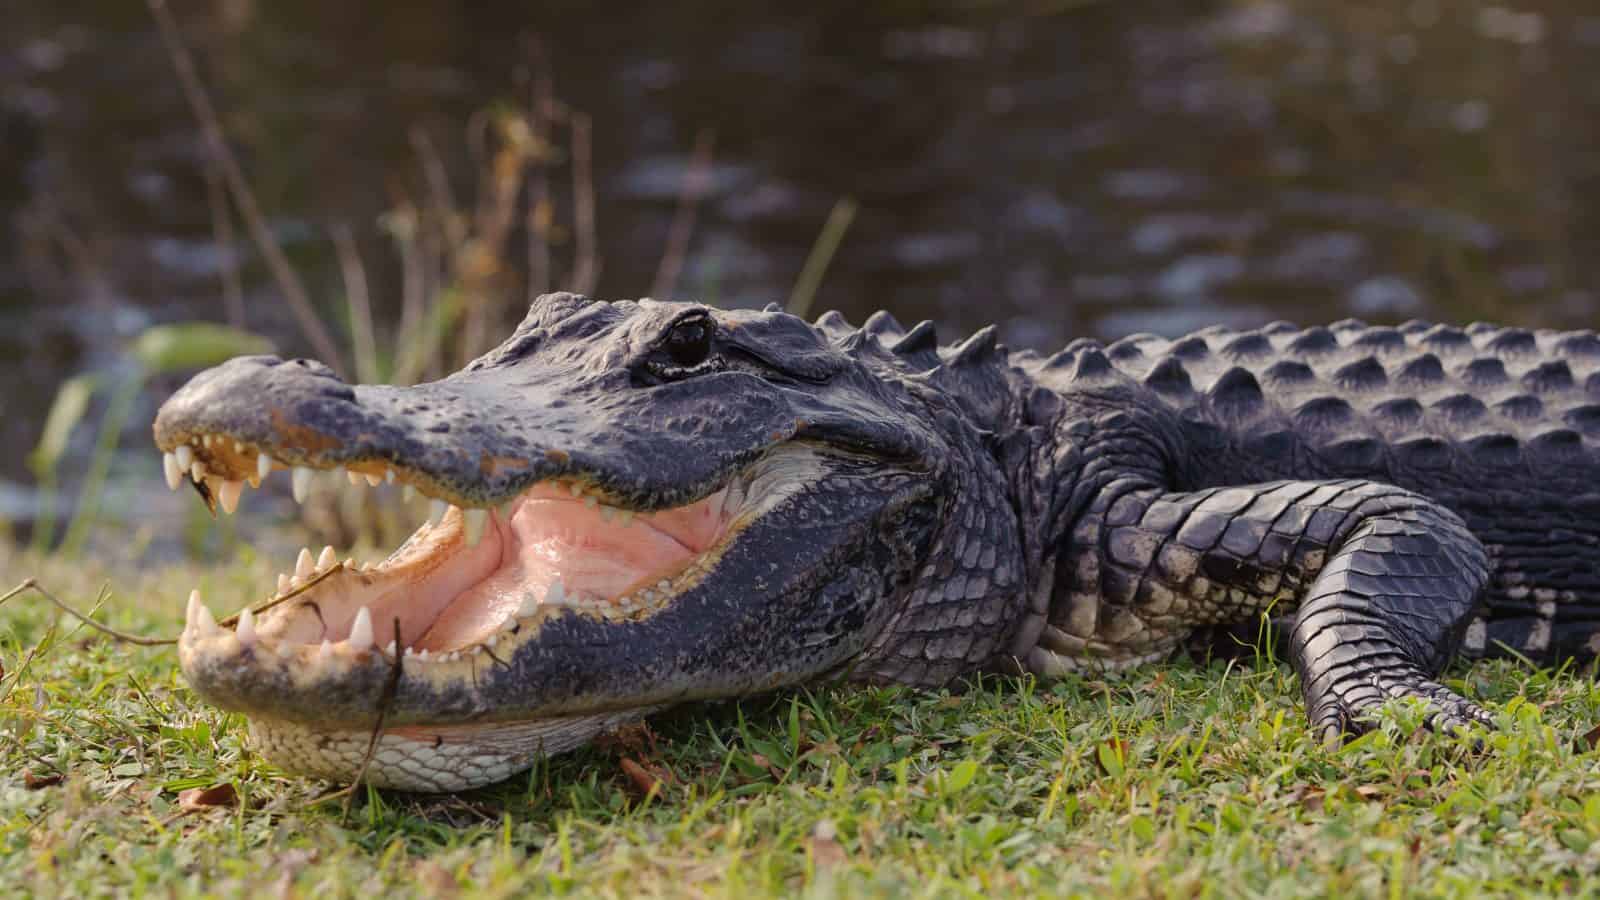 An alligator bears its teeth at the Everglades National Park.